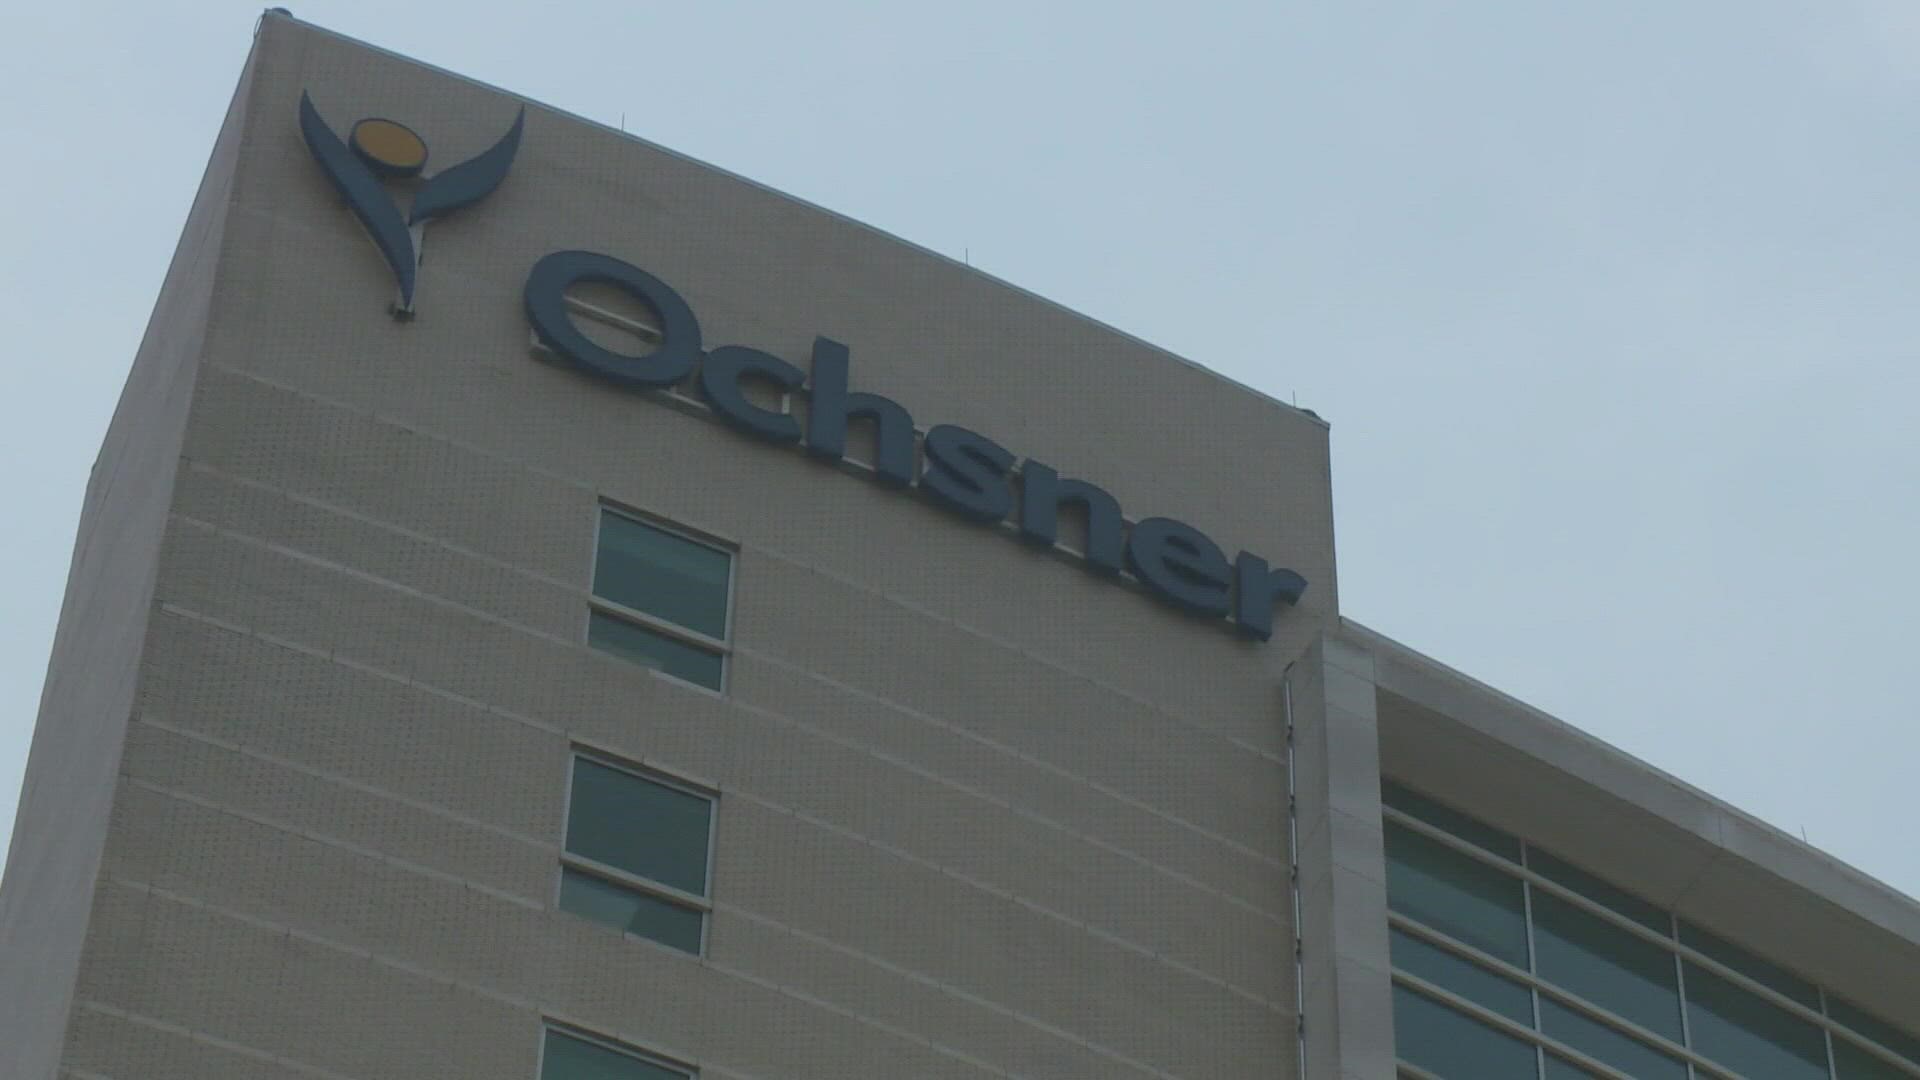 Ochsner CEO Warner Thomas shares a update on the state of LA hospitals as medical workers deal with Omicron spread